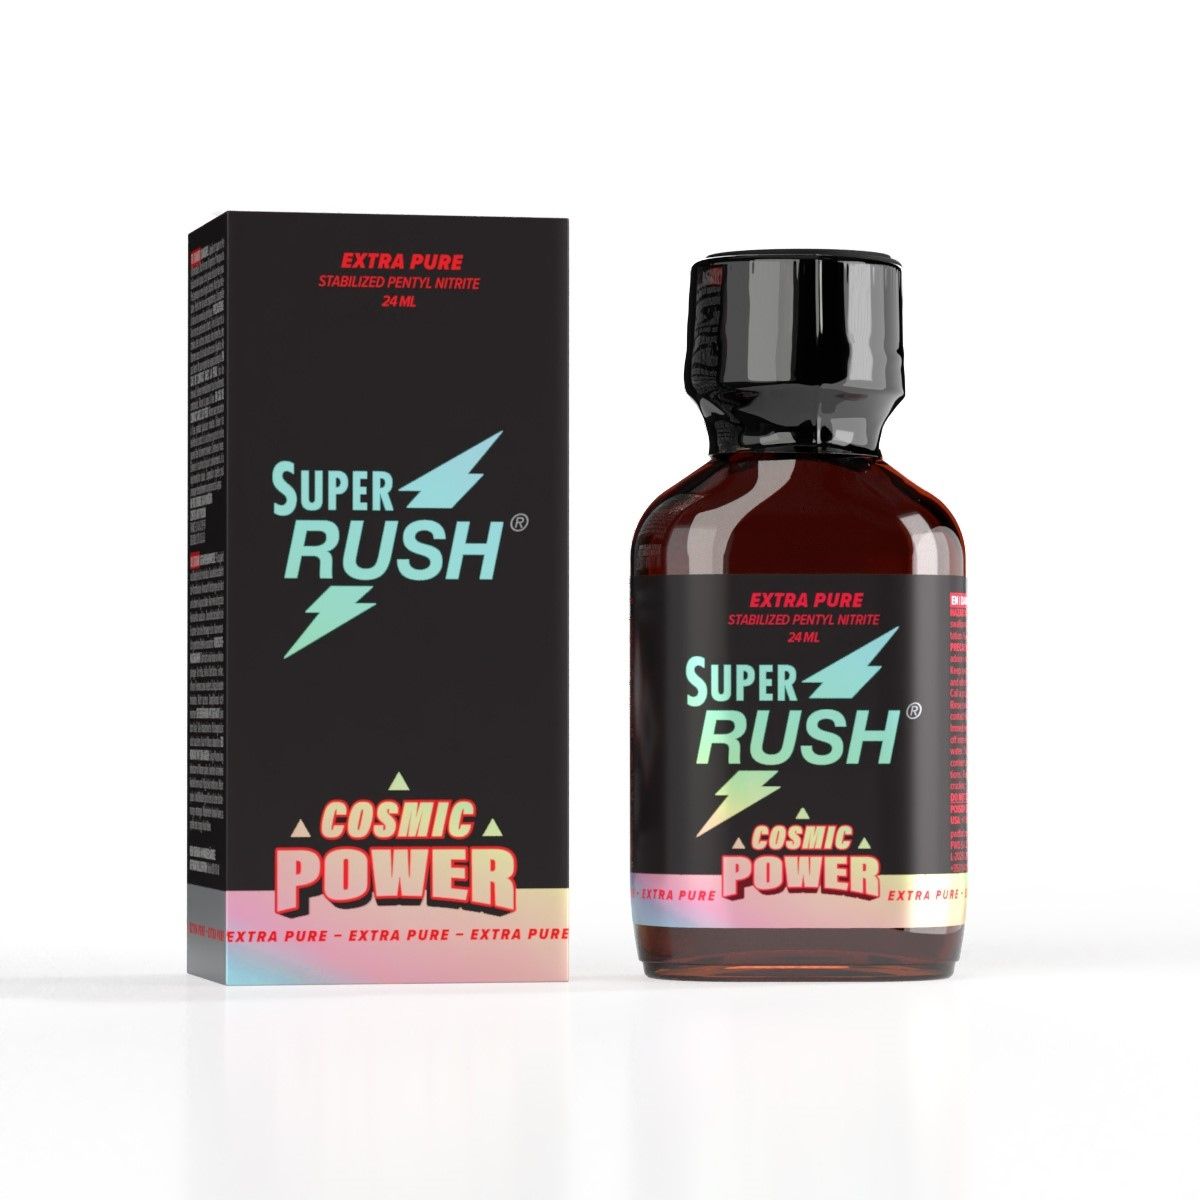 A sleek Super Rush Cosmic Power Pentyl packaging and bottle design with a bold, futuristic look emphasizing extra purity.